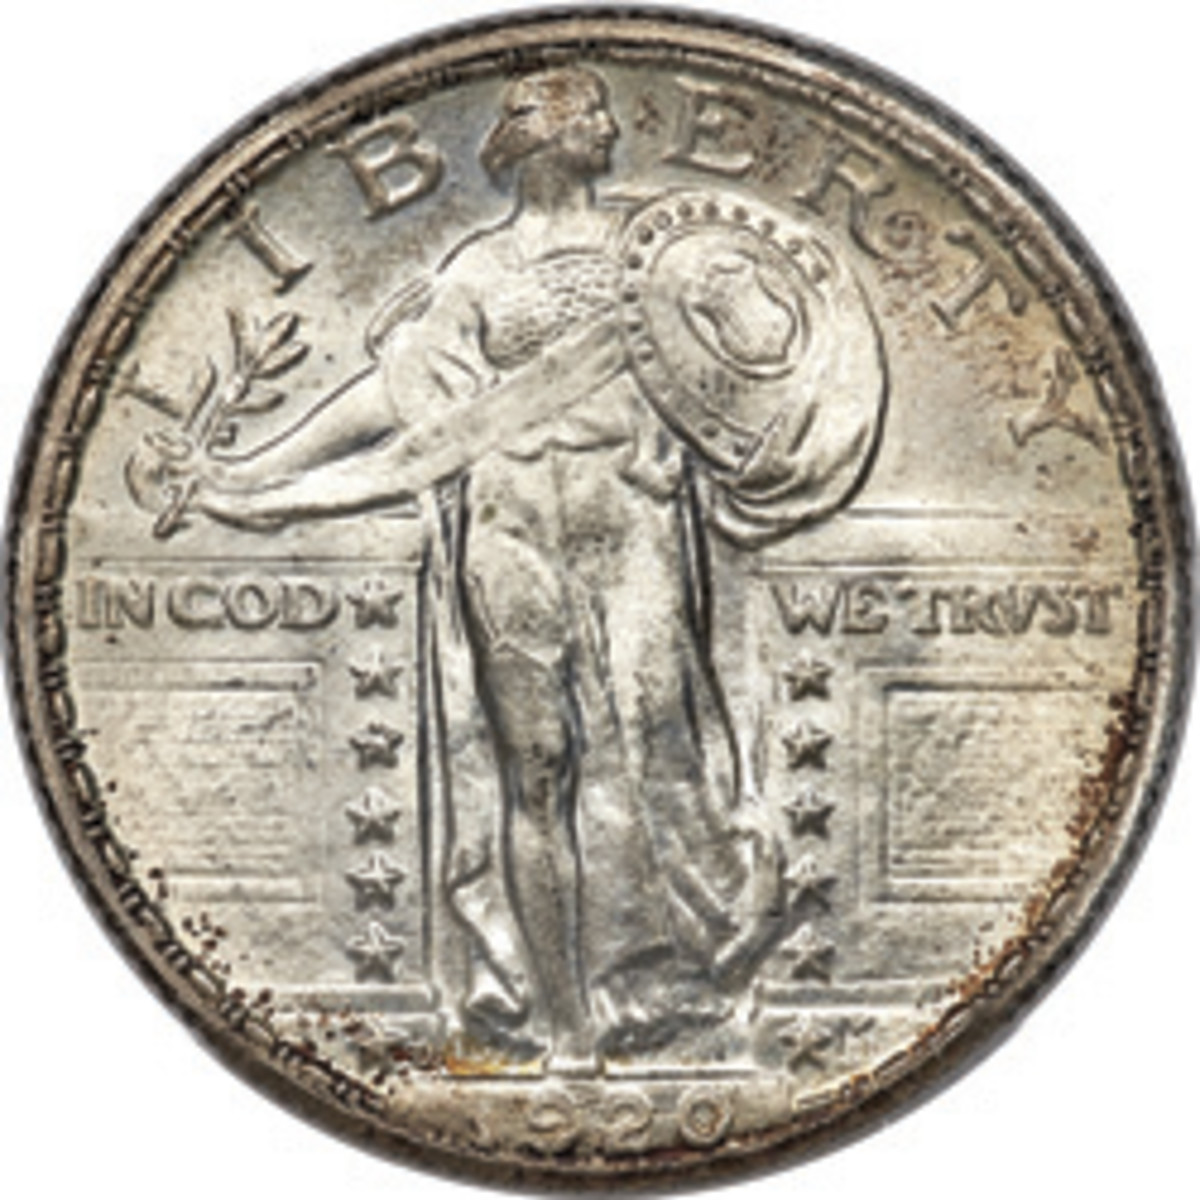  A Standing Liberty adorned the quarter from 1916 through 1930.